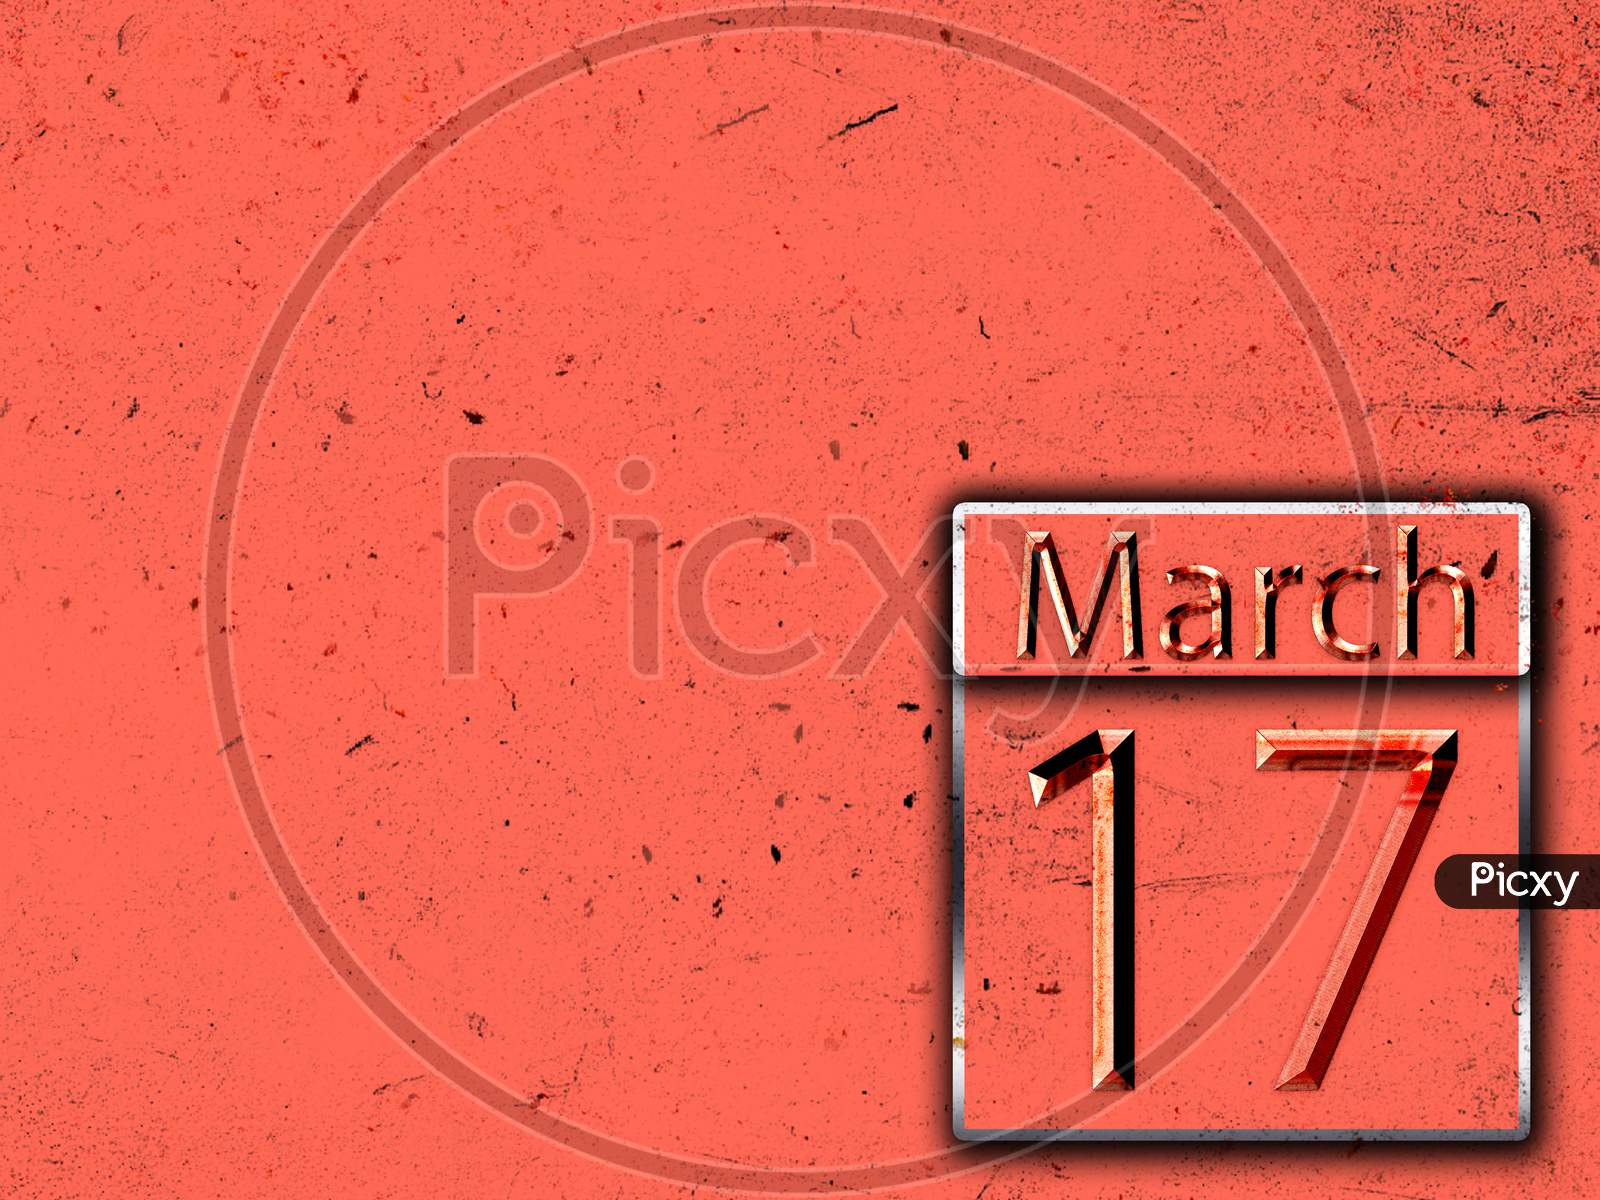 17 March, Monthly Calendar On Backgrand